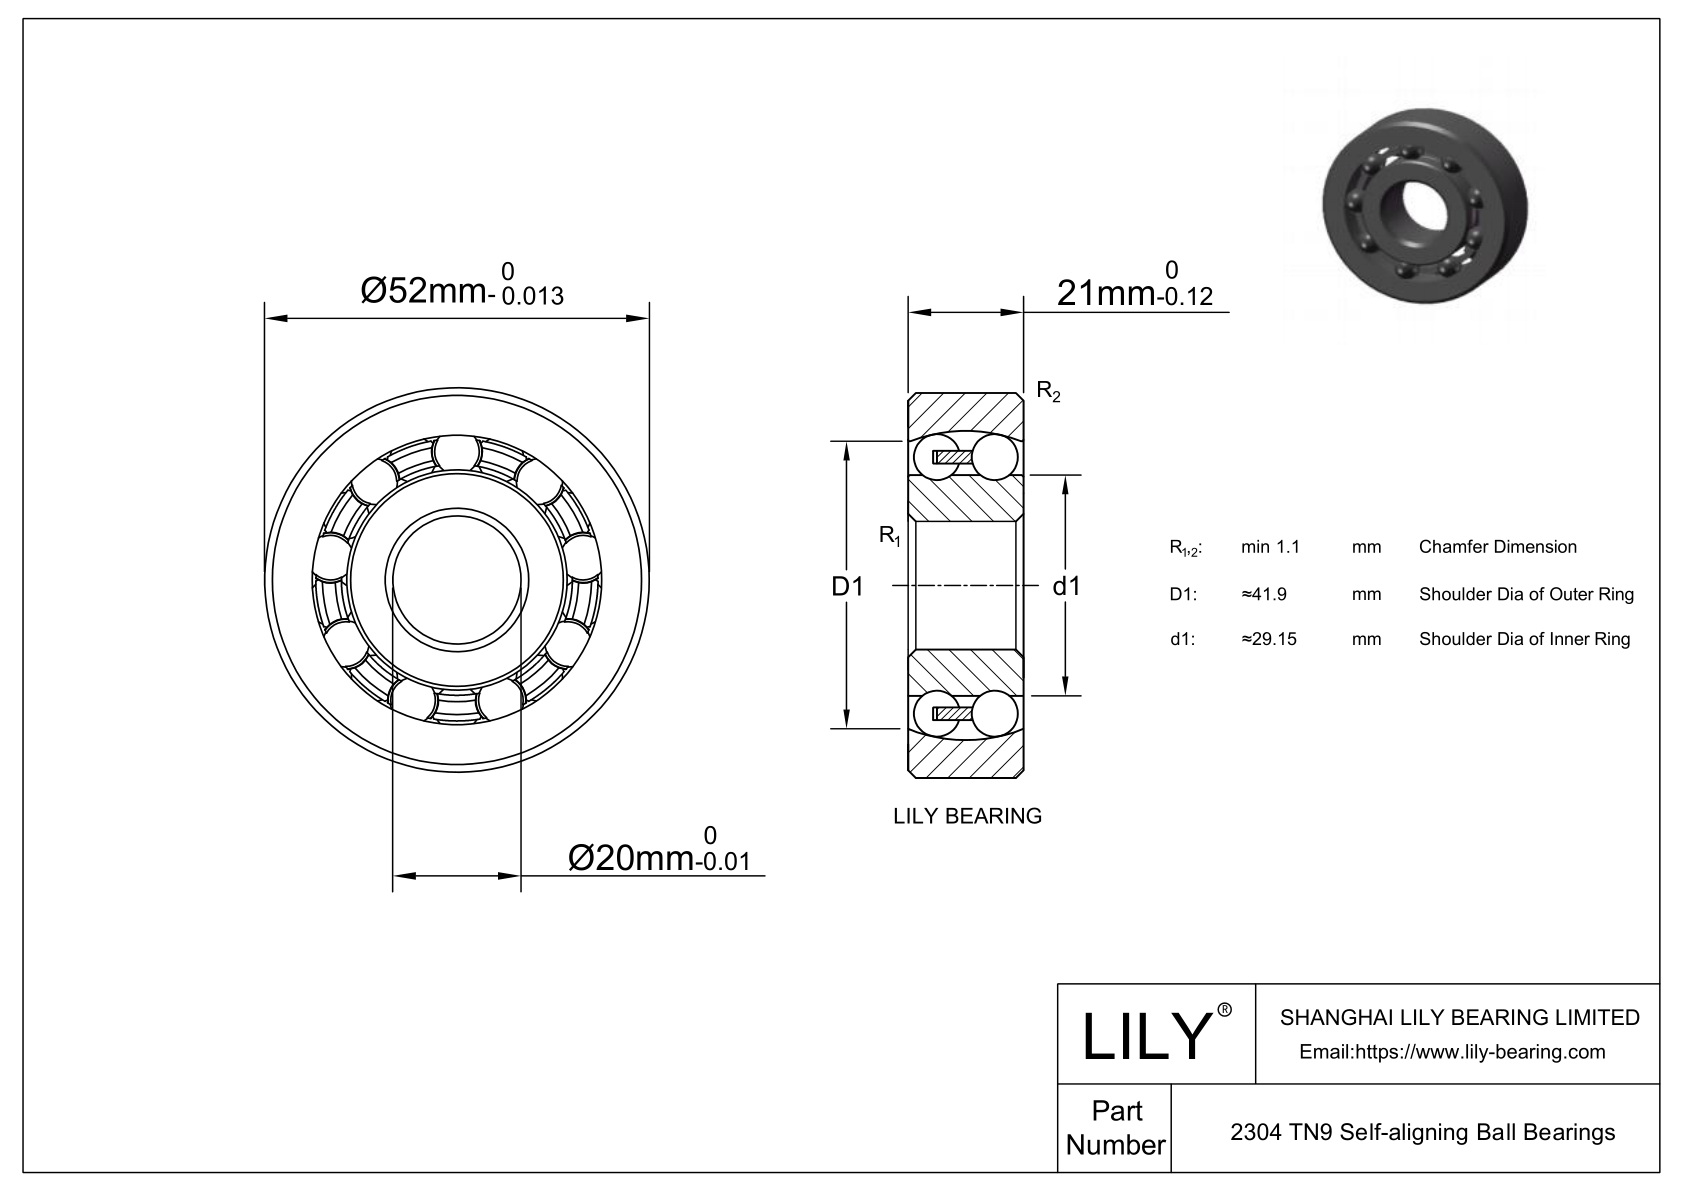 S2304 TN9 Stainless Steel Self Aligning Ball Bearings cad drawing